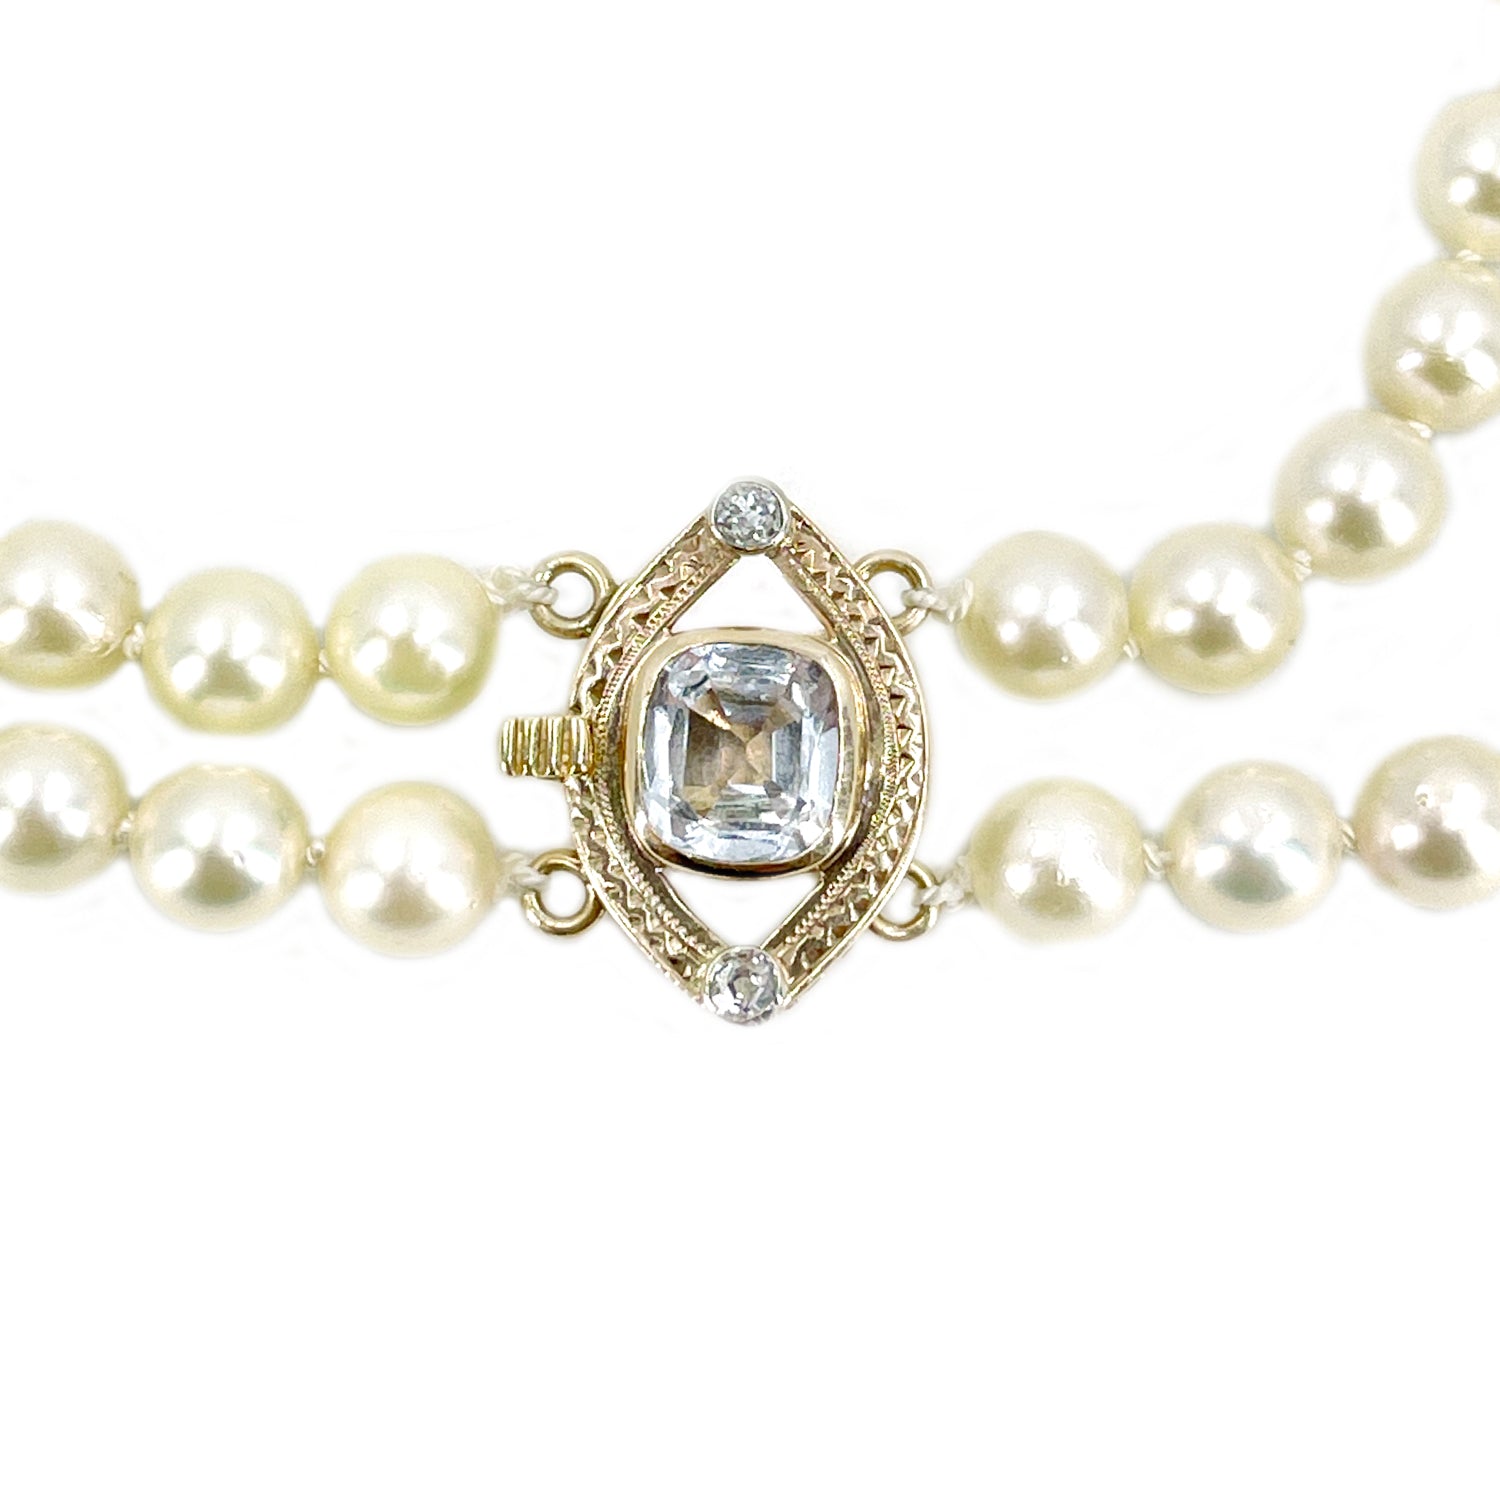 Diamond Aquamarine Vintage Japanese Saltwater Cultured Akoya Pearl Double Strand Necklace - 14K Yellow Gold 18 & 19.50 Inch